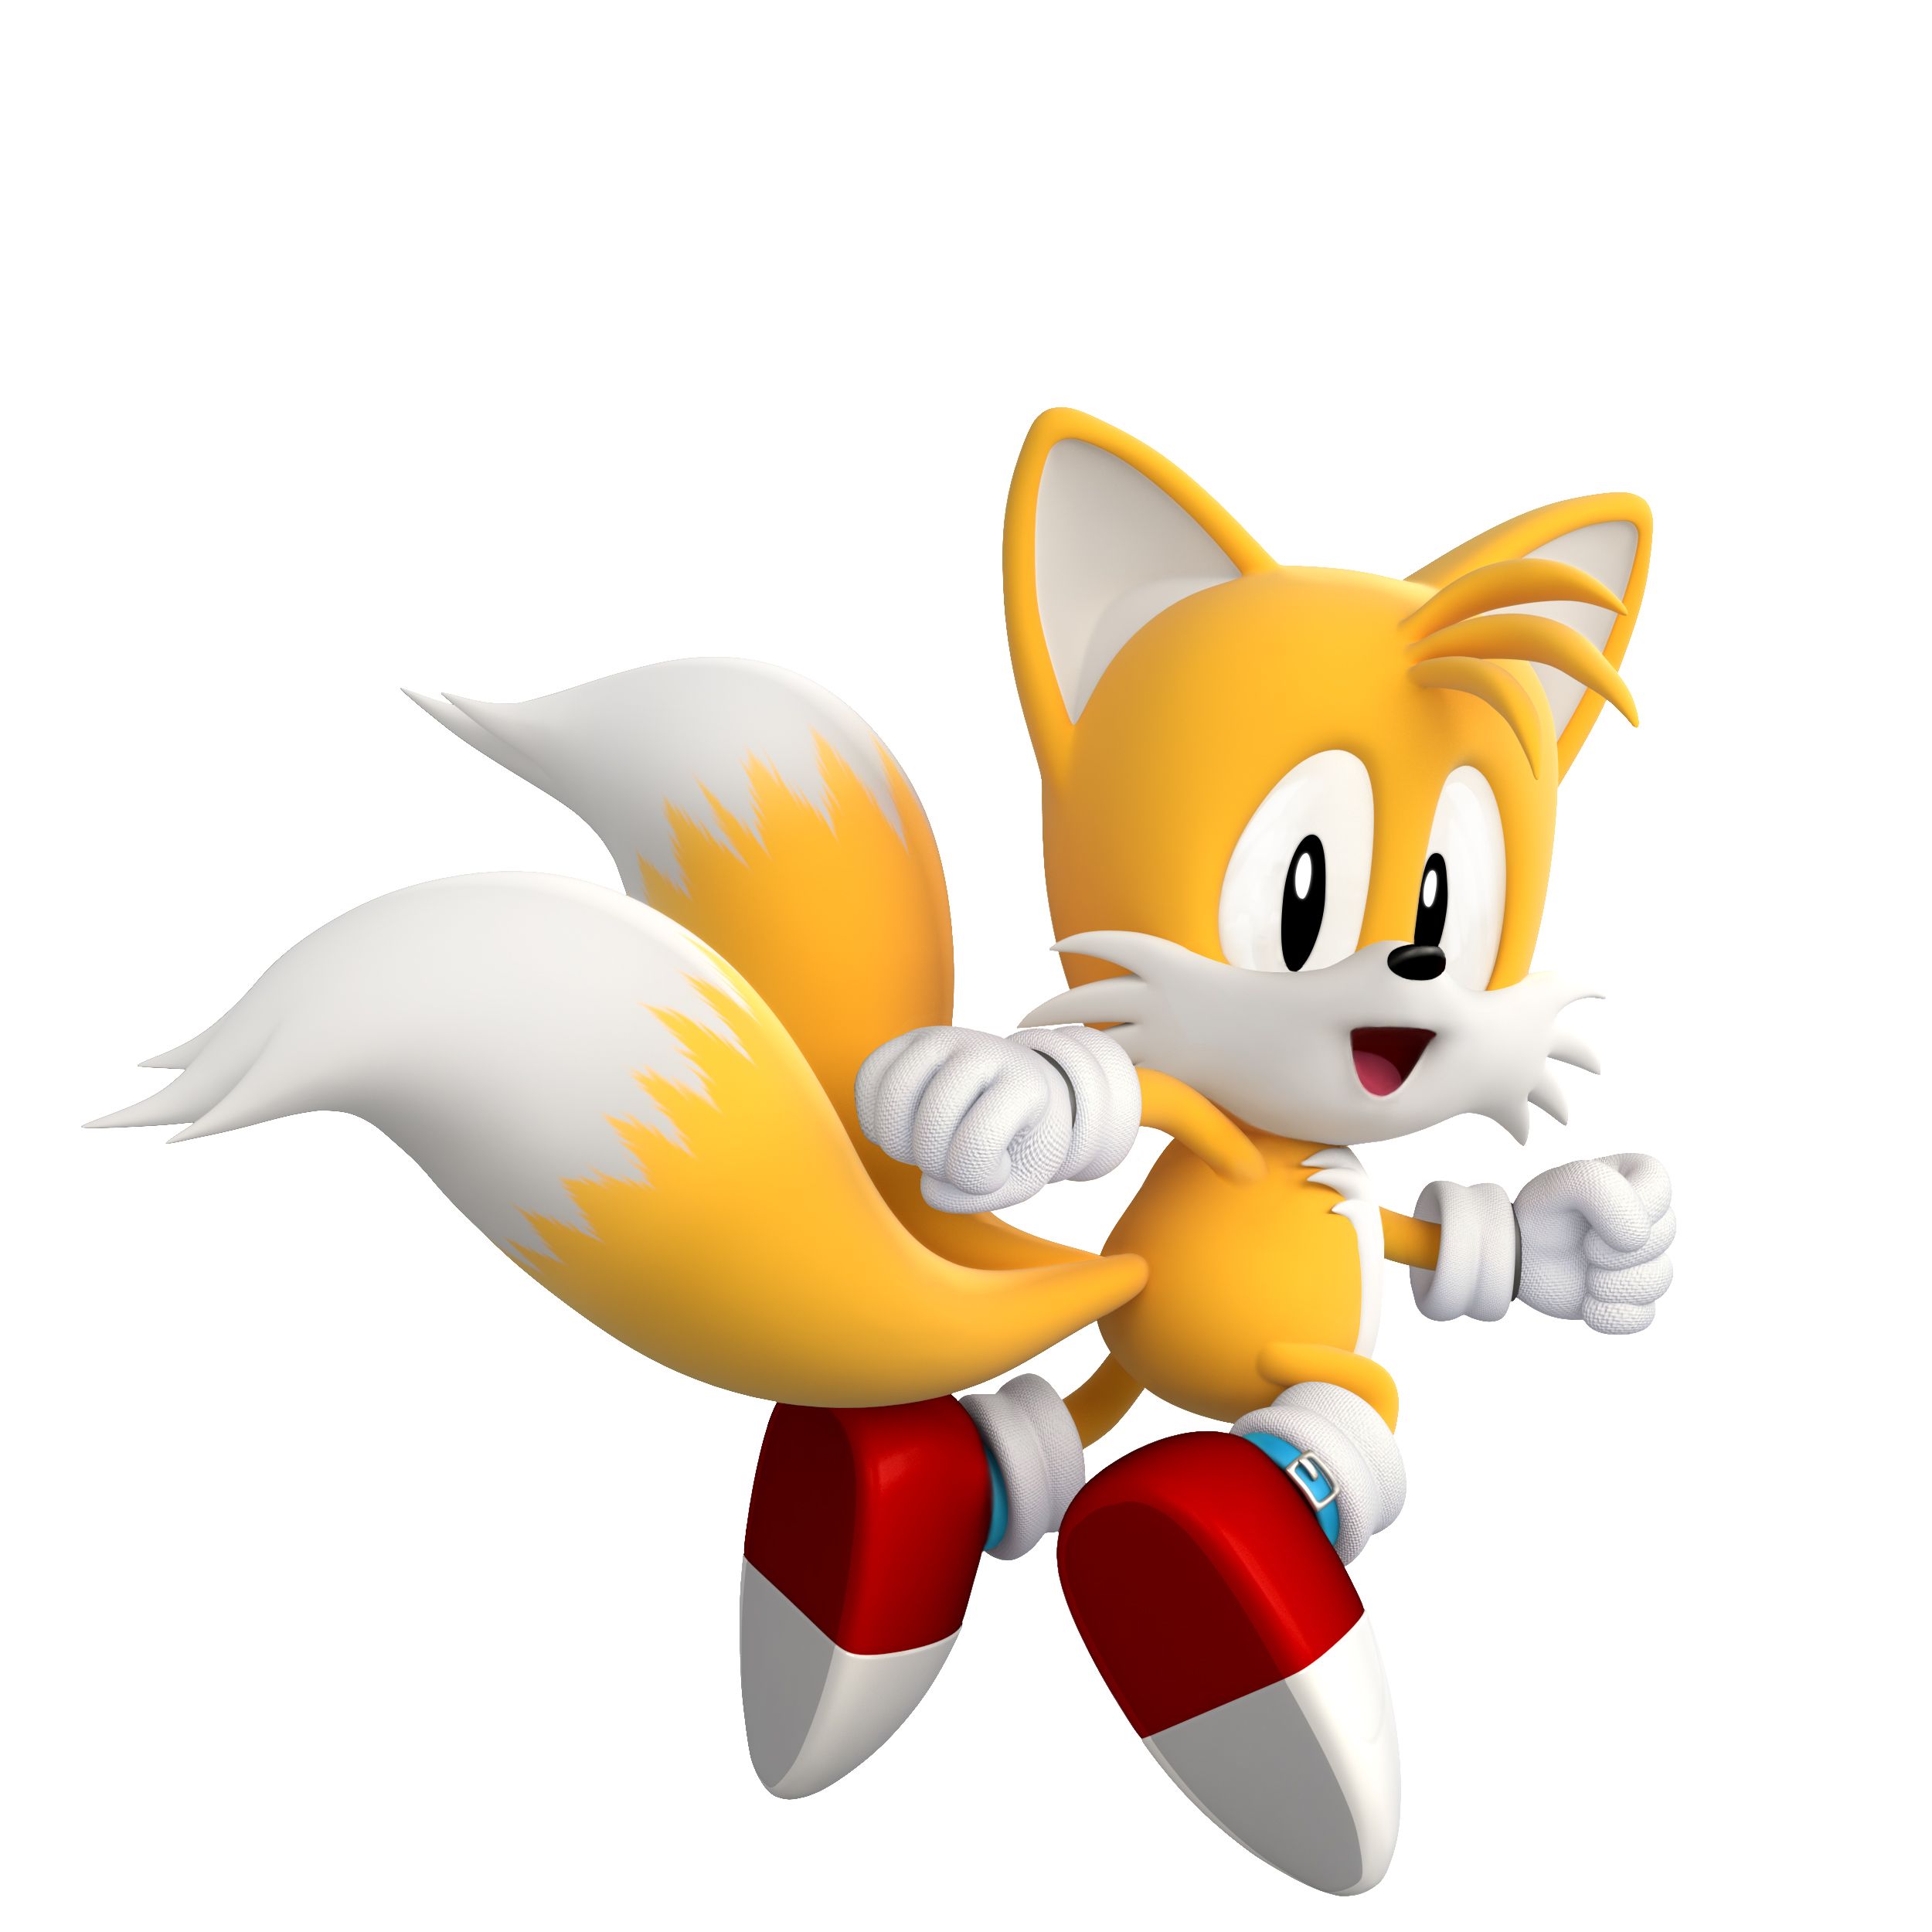 Tails ?